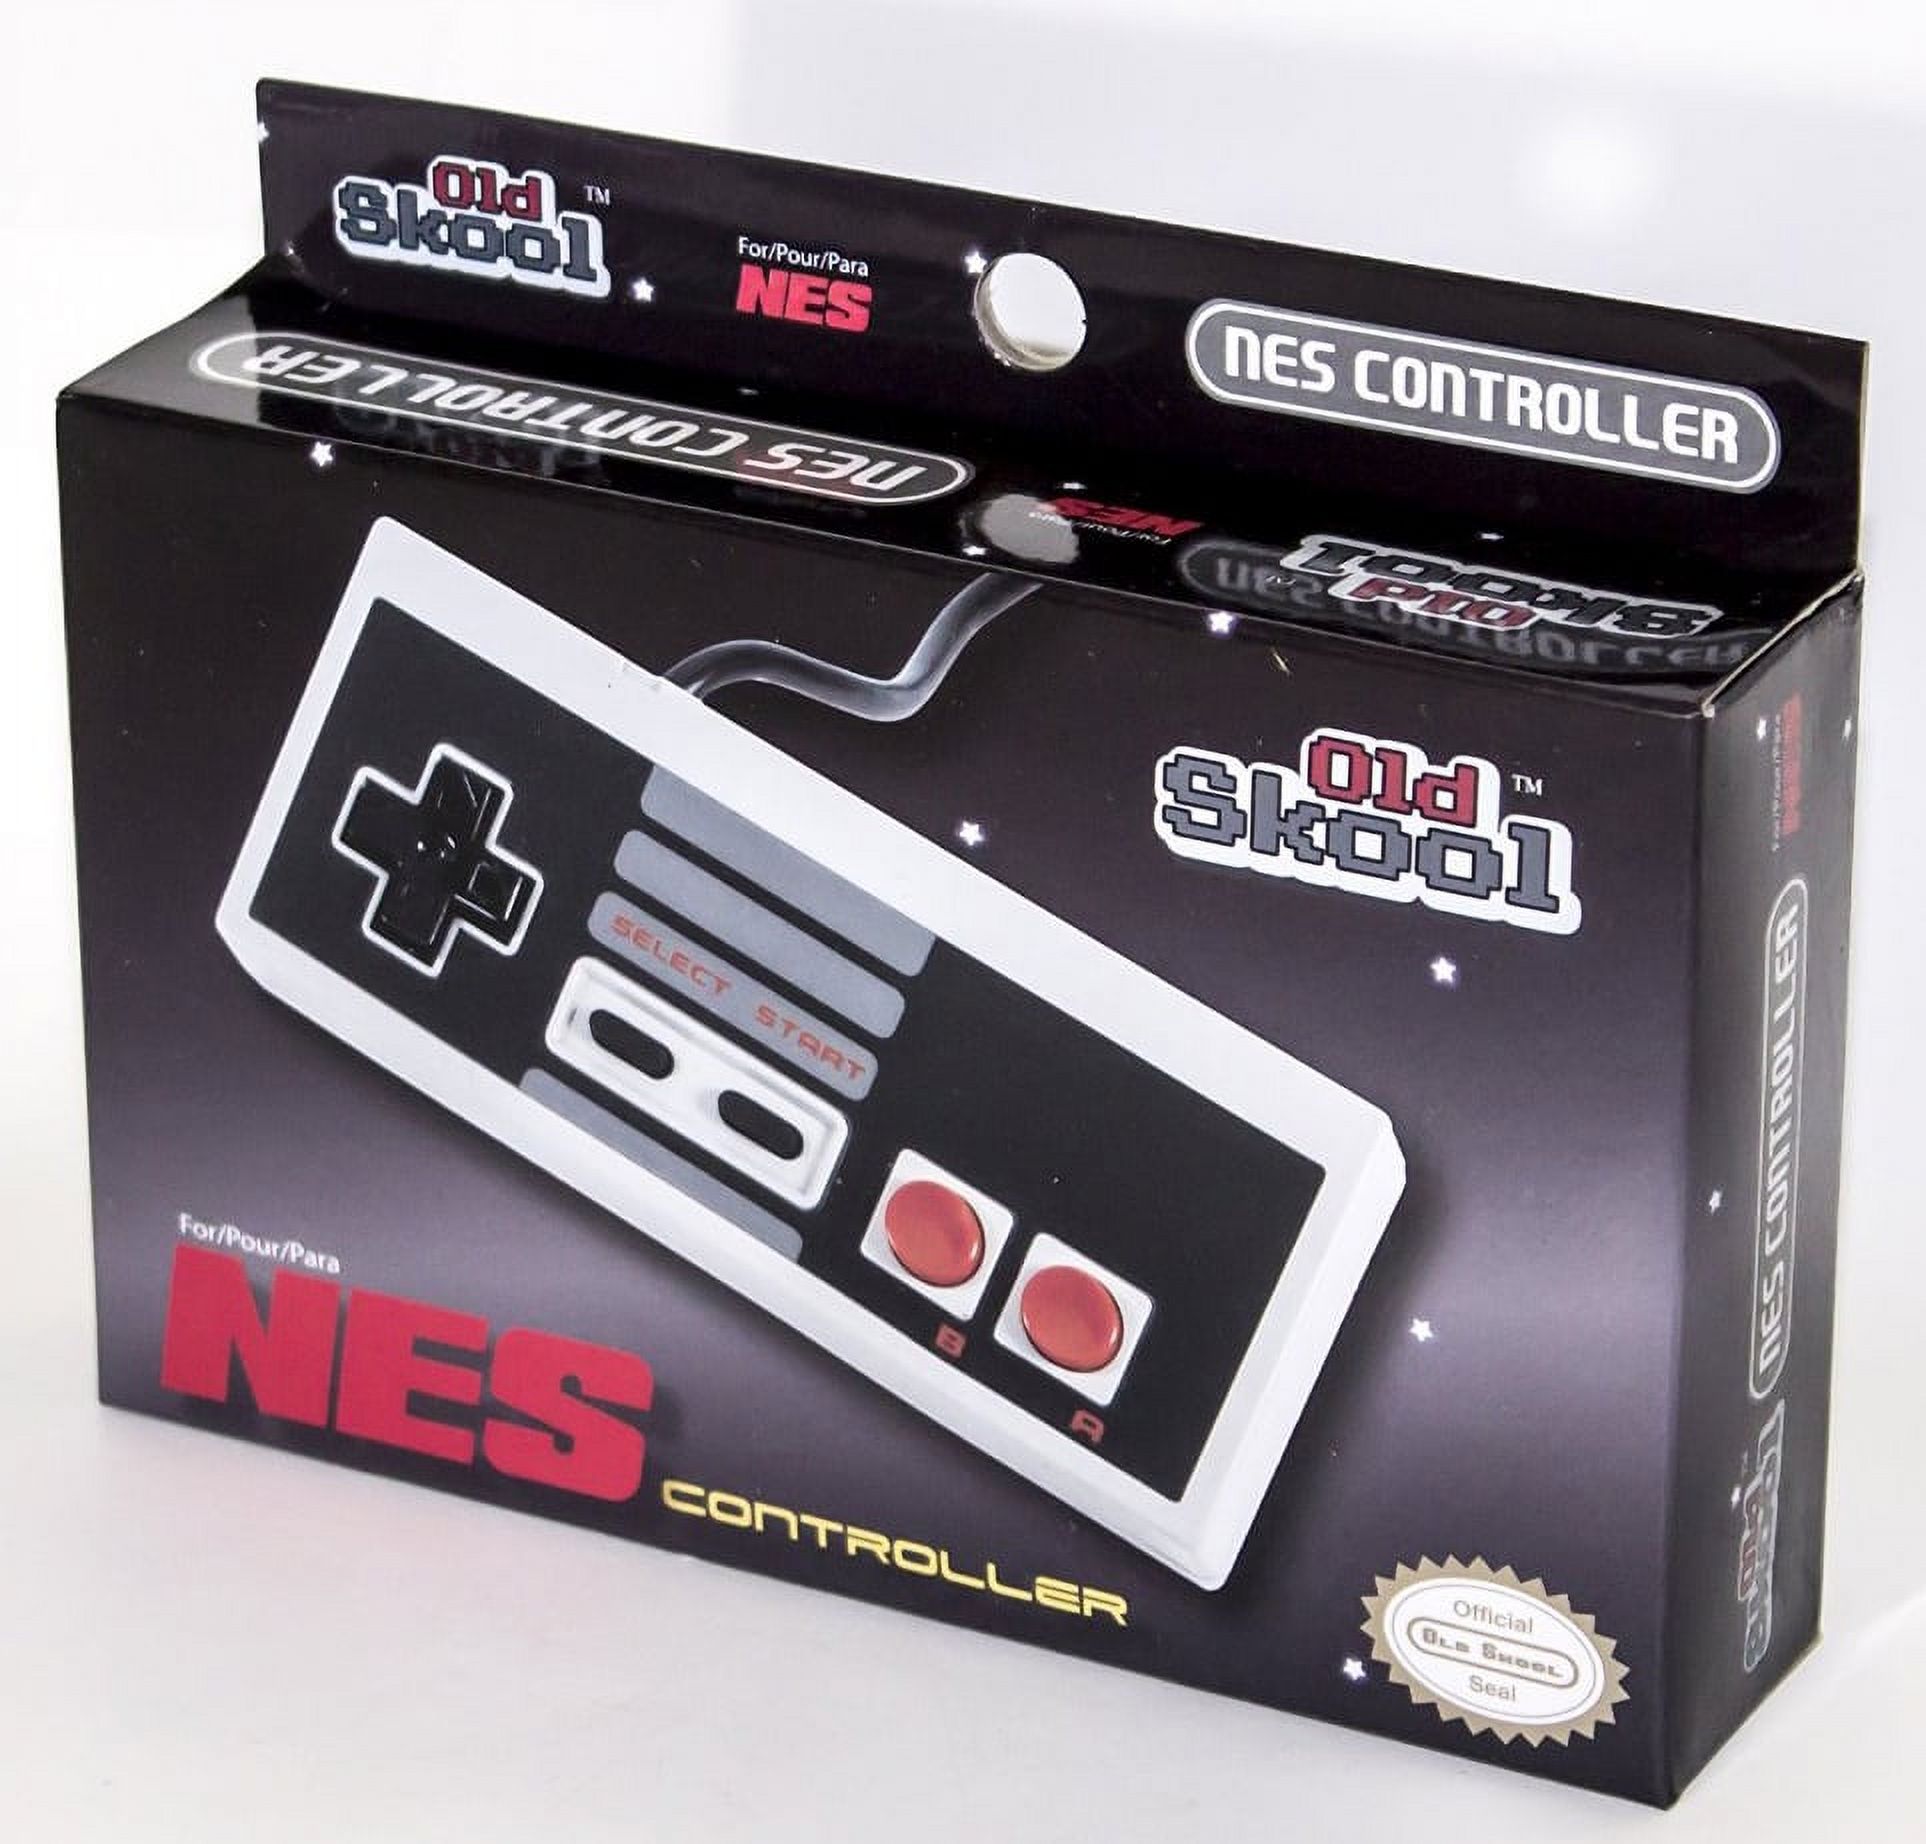 NES Controller - image 1 of 1